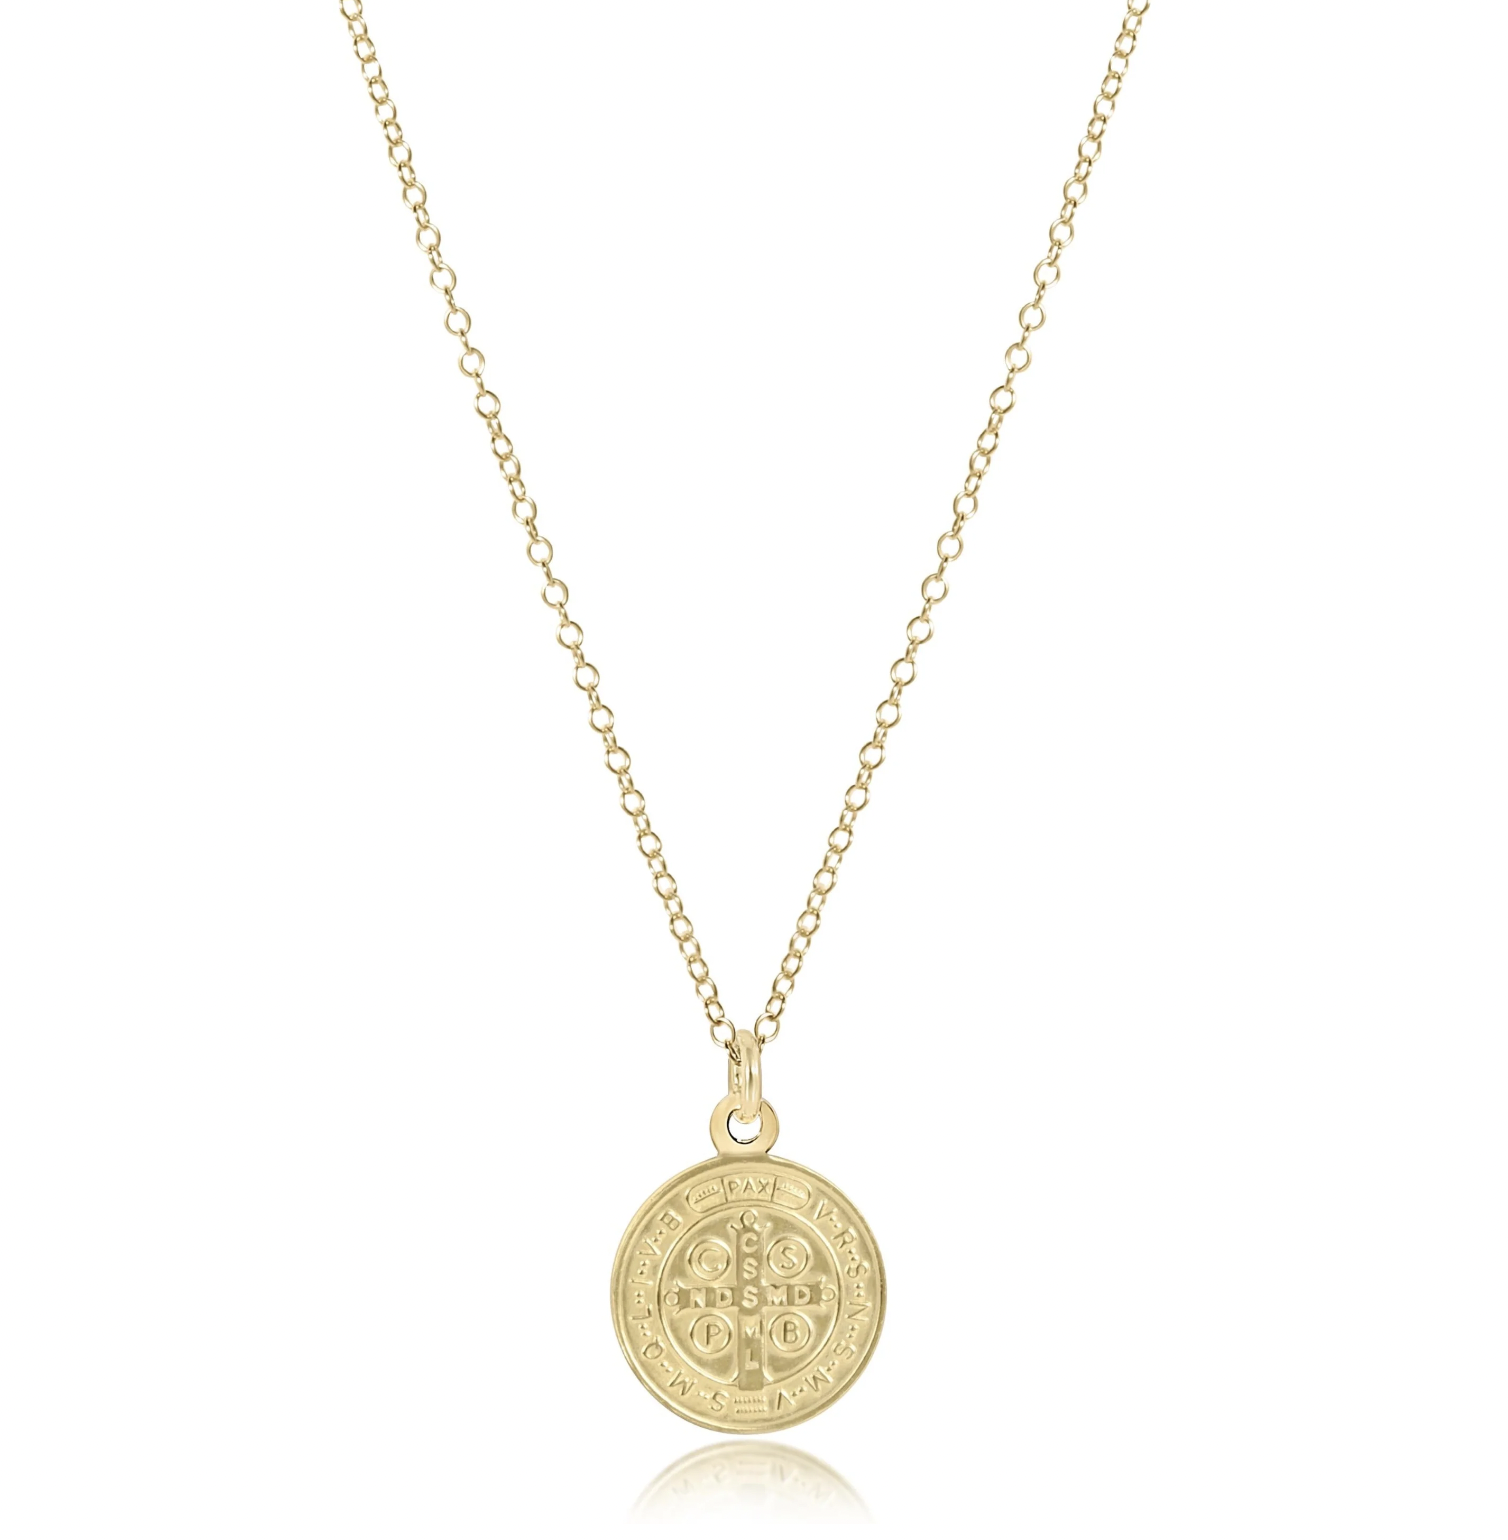 ENEWTON 16" NECKLACE GOLD-BLESSING GOLD DISC